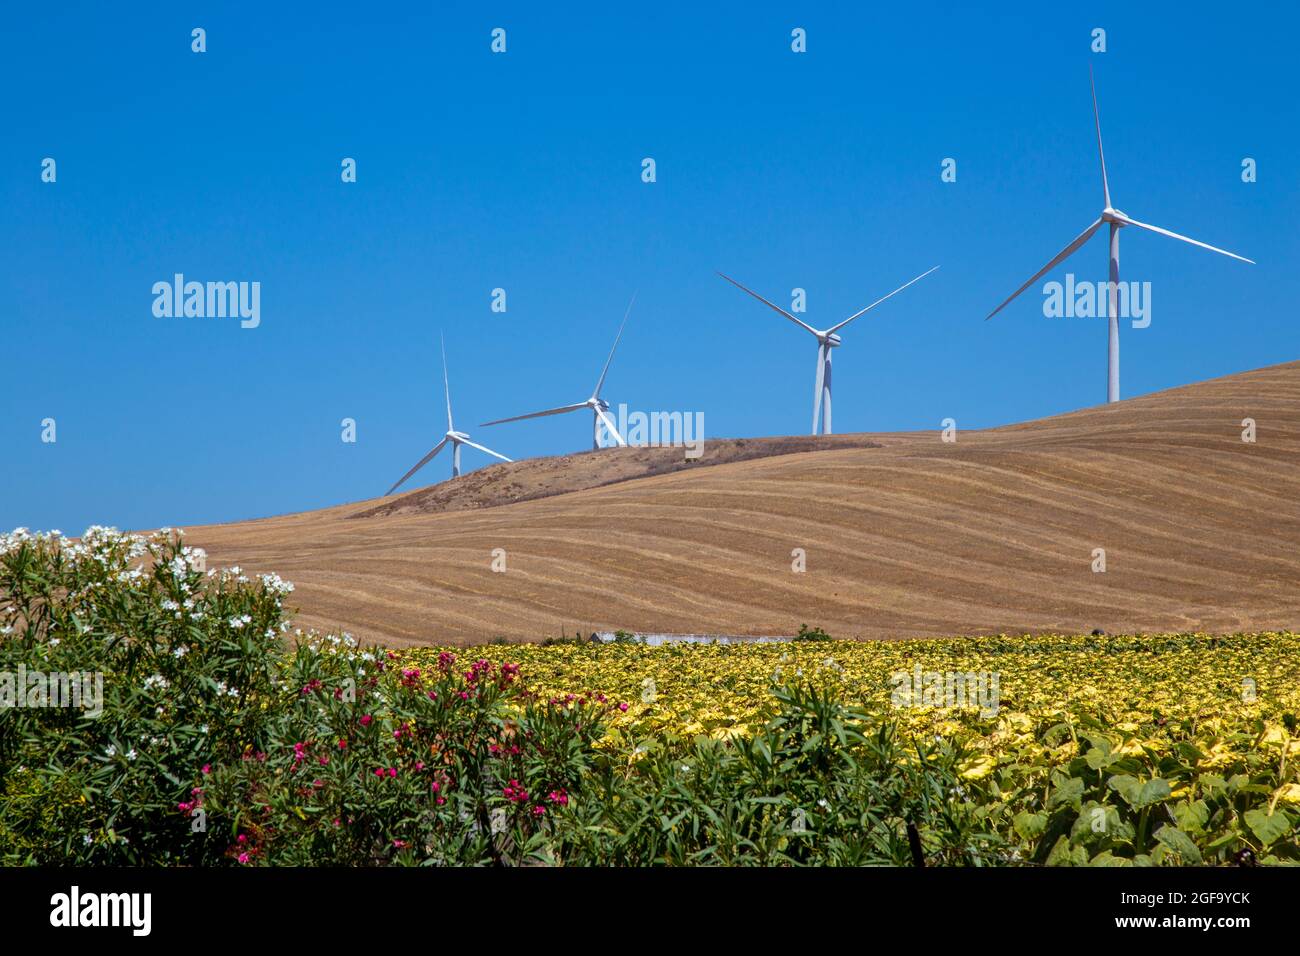 Windmills to create renewable energy in agricultural fields Stock Photo